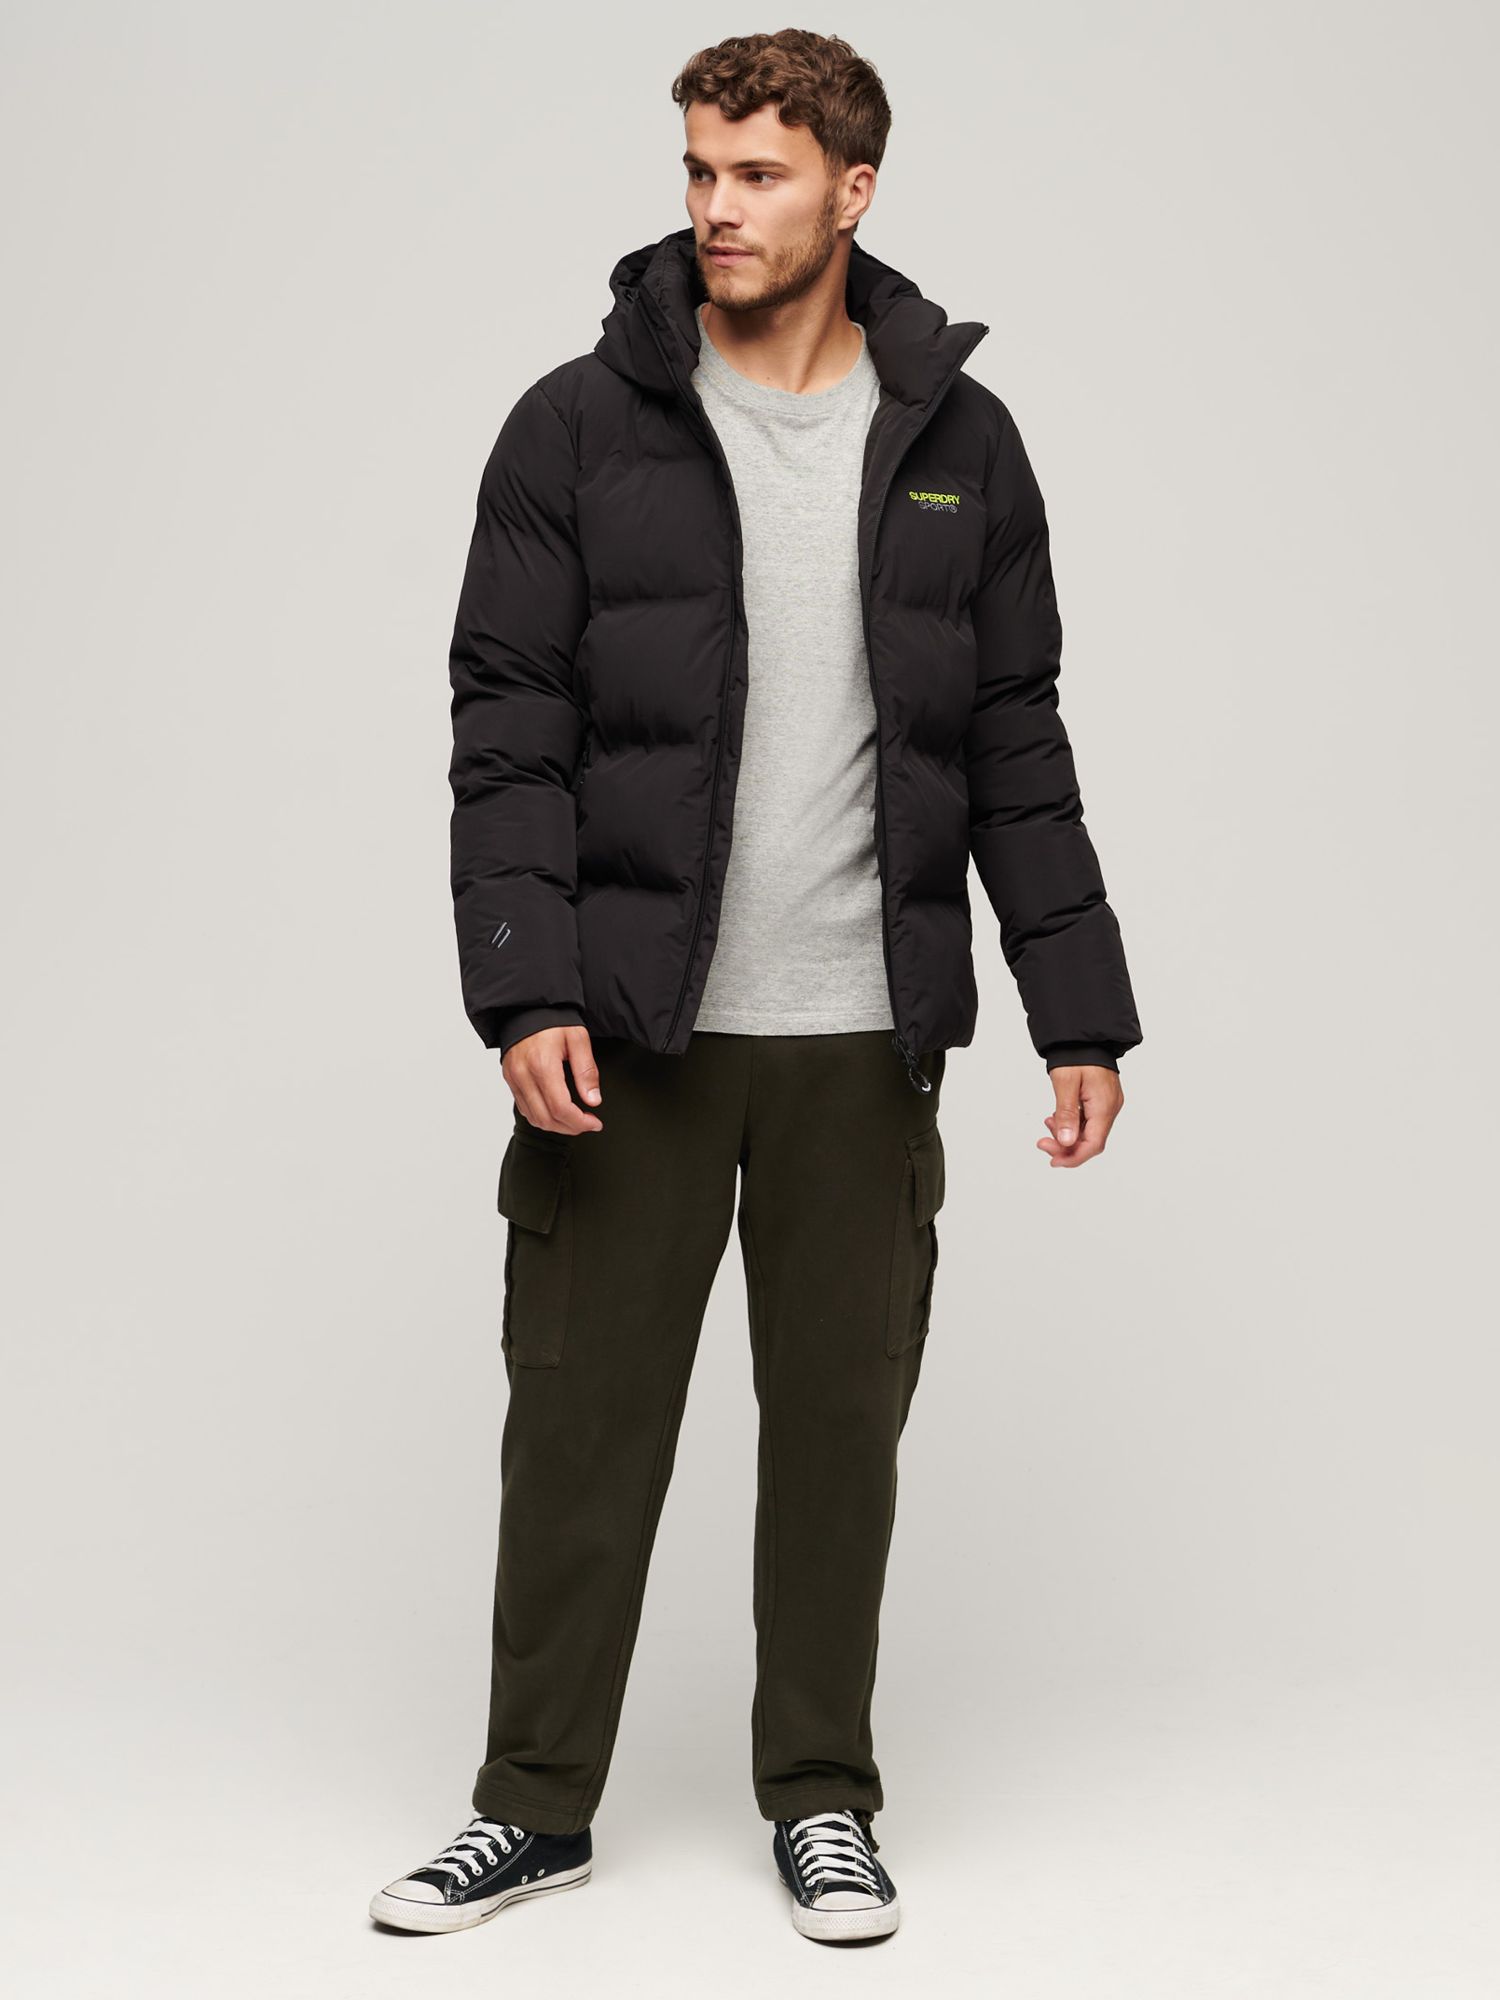 Superdry Hooded Boxy Puffer Jacket, Black at John Lewis & Partners